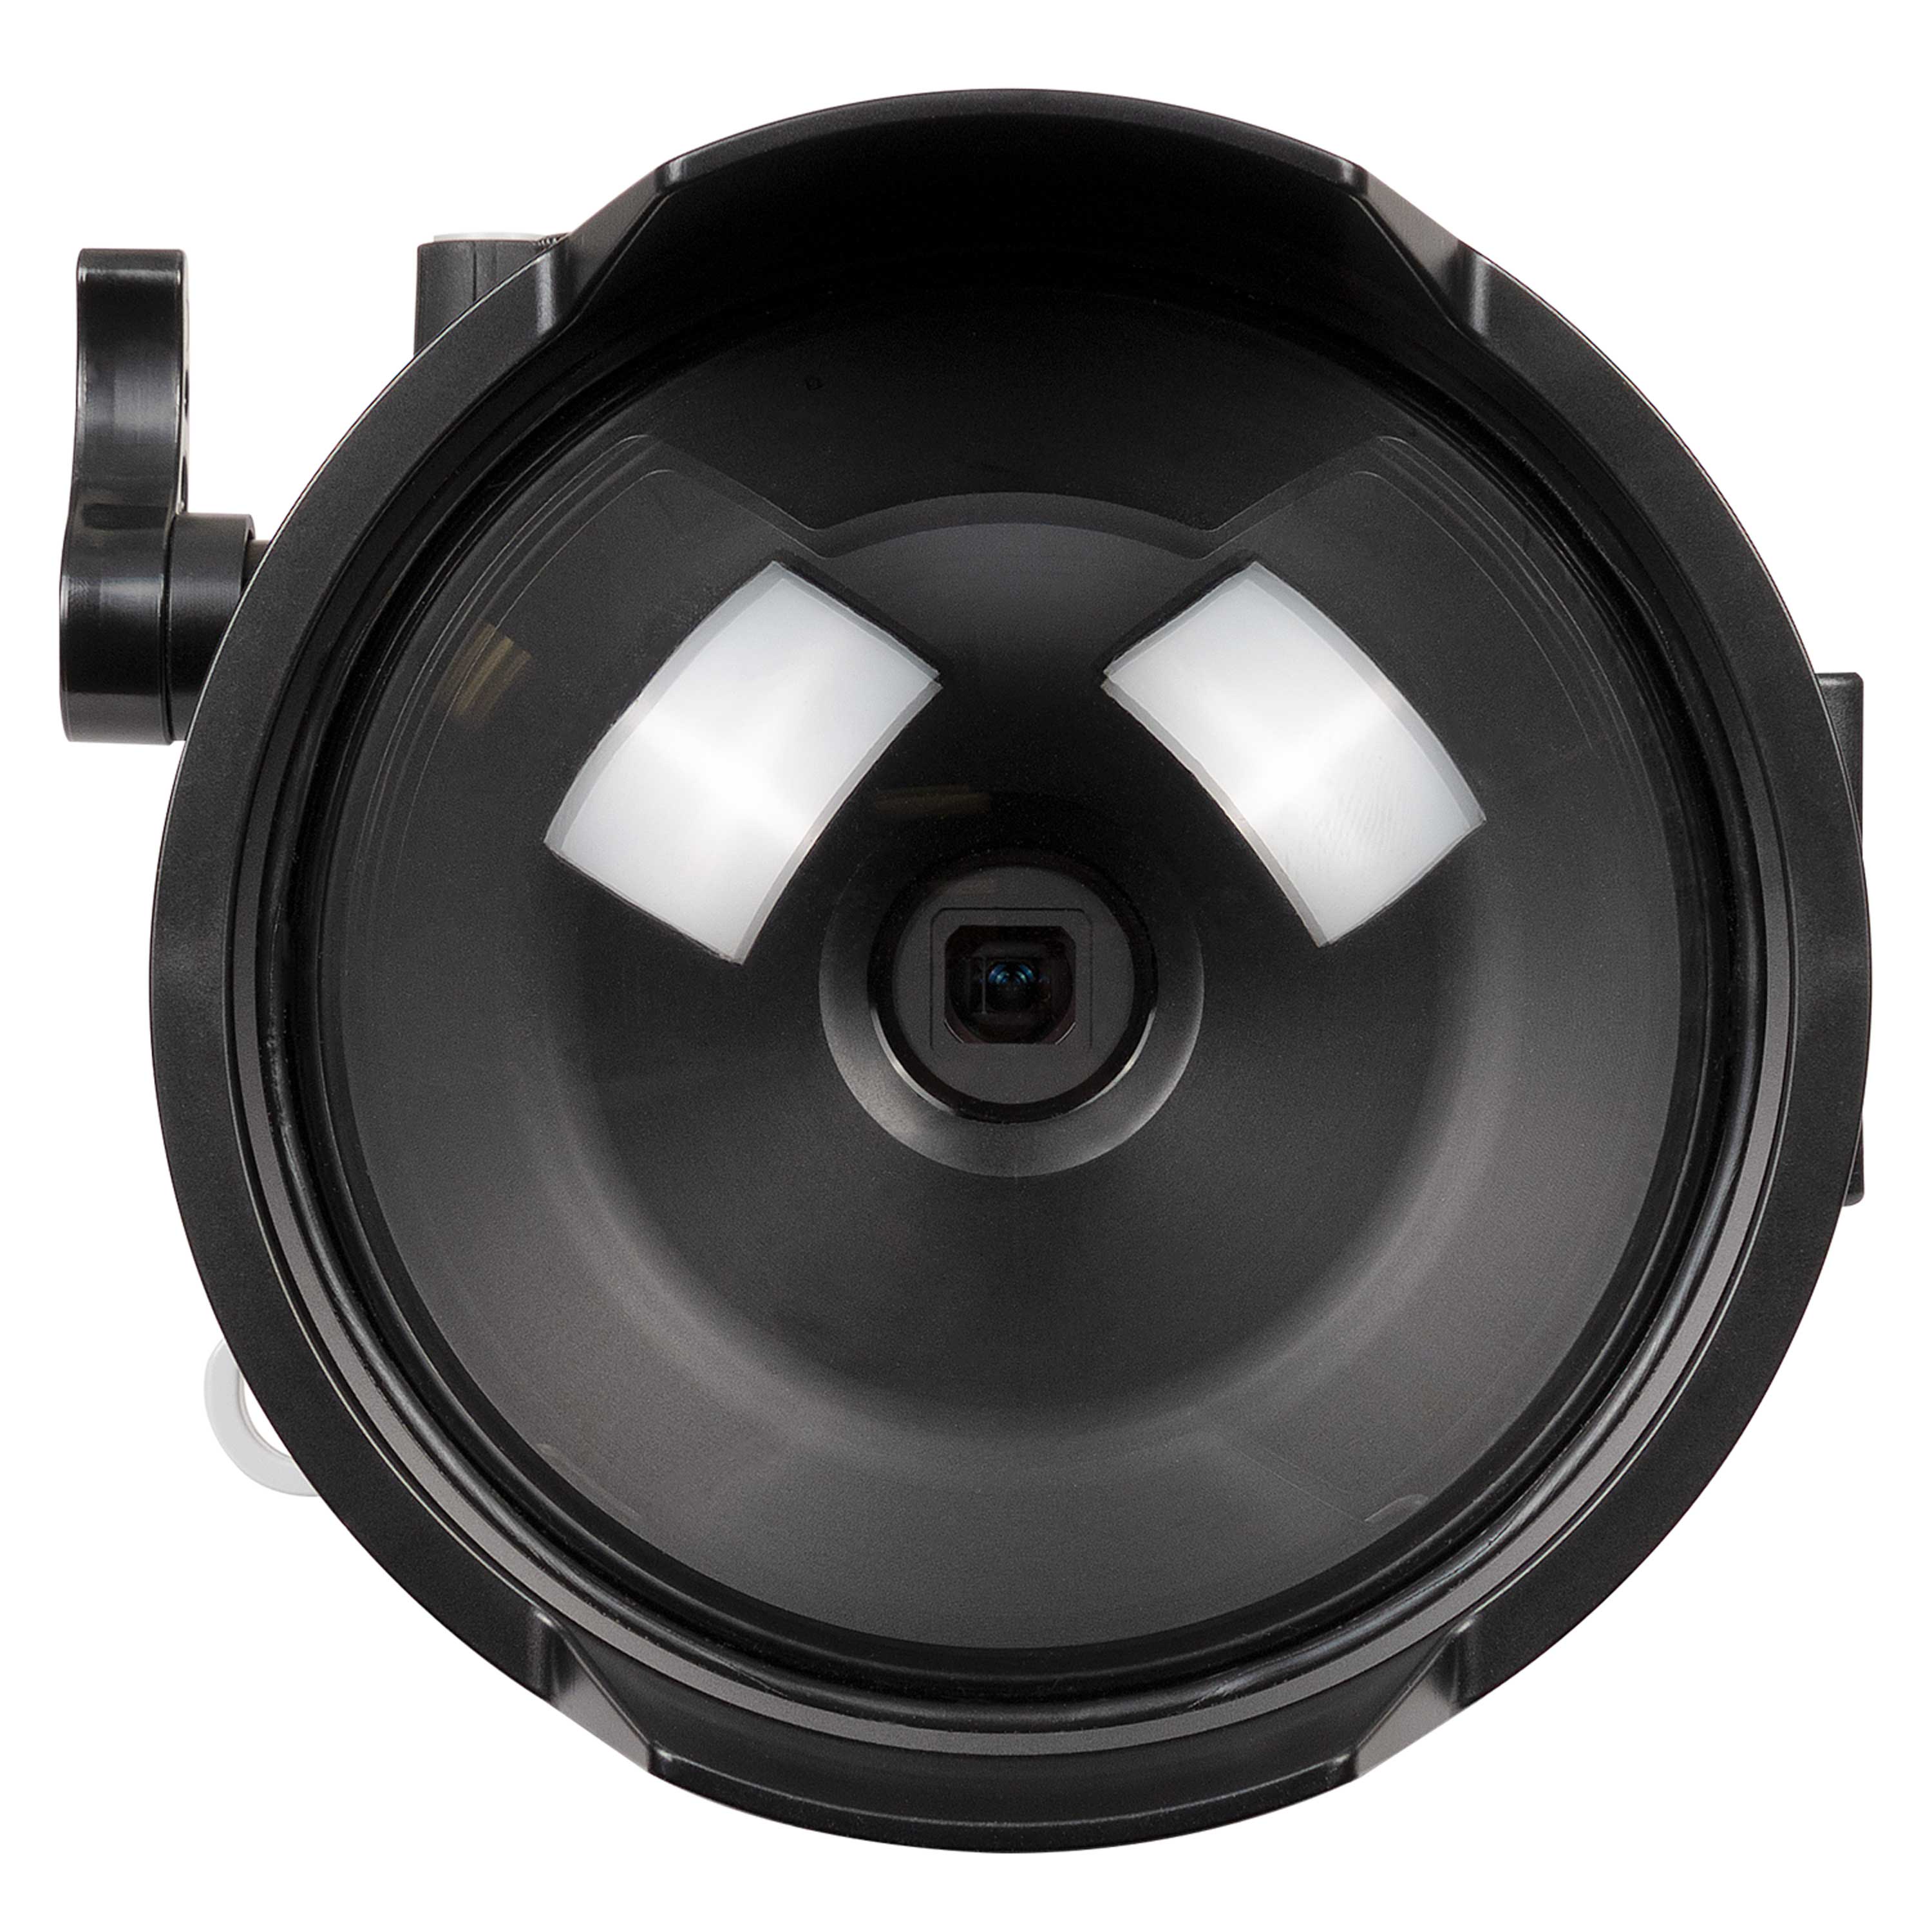 DC1 6 Inch Dome for Olympus Tough TG-6, TG-5, TG-4, TG-3